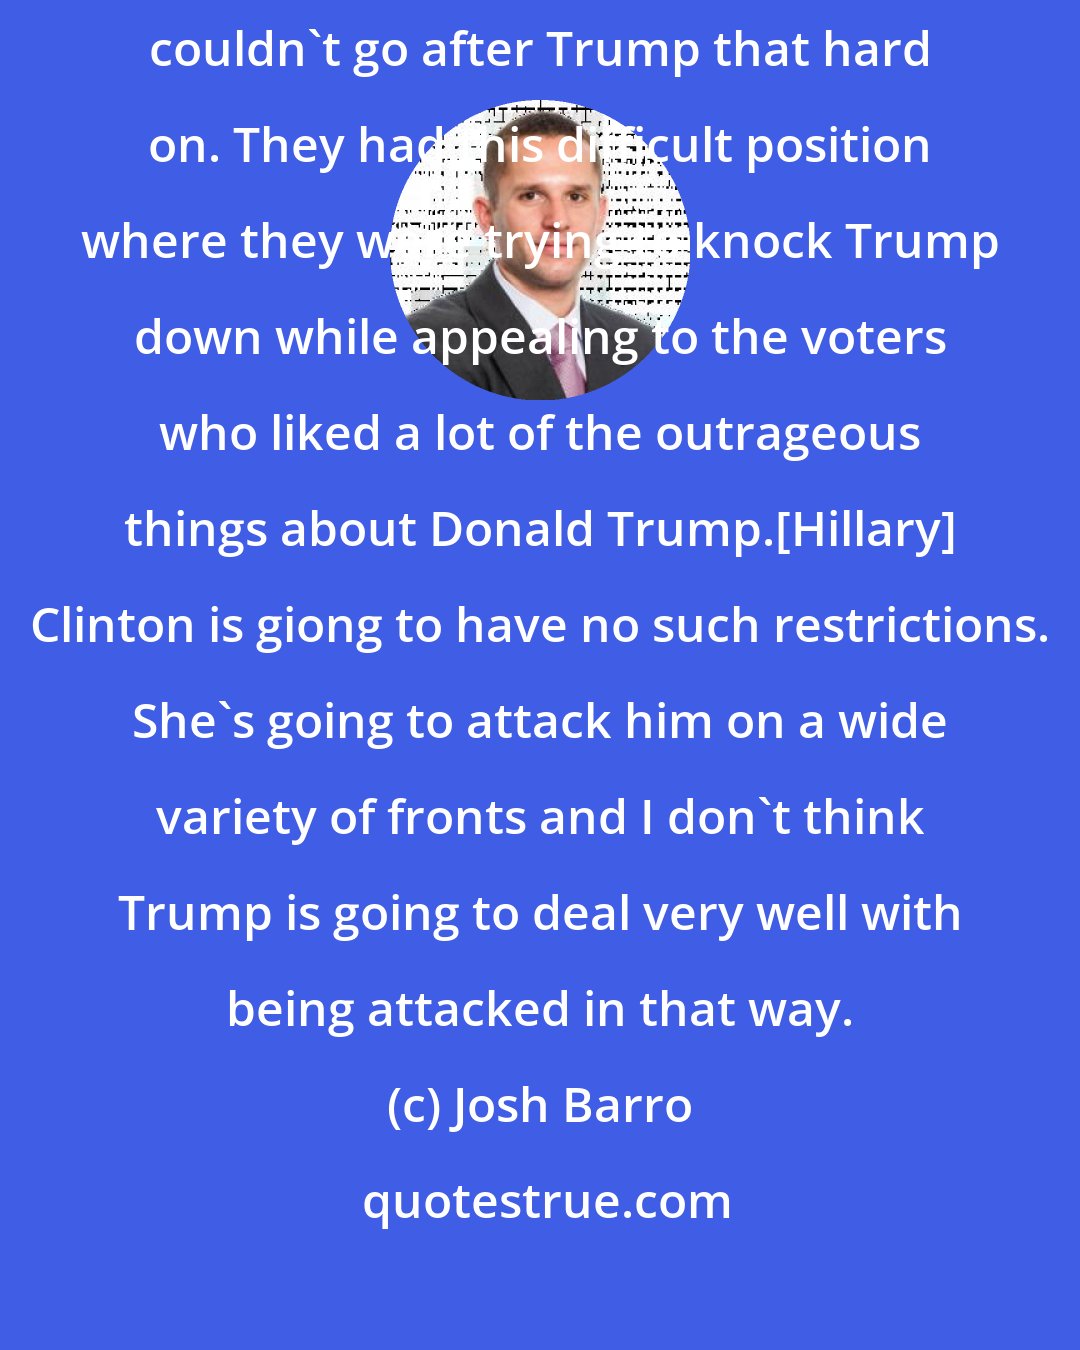 Josh Barro: There was a whole set of issues that the other Republican candidates couldn`t go after Trump that hard on. They had this difficult position where they were trying to knock Trump down while appealing to the voters who liked a lot of the outrageous things about Donald Trump.[Hillary] Clinton is giong to have no such restrictions. She`s going to attack him on a wide variety of fronts and I don`t think Trump is going to deal very well with being attacked in that way.